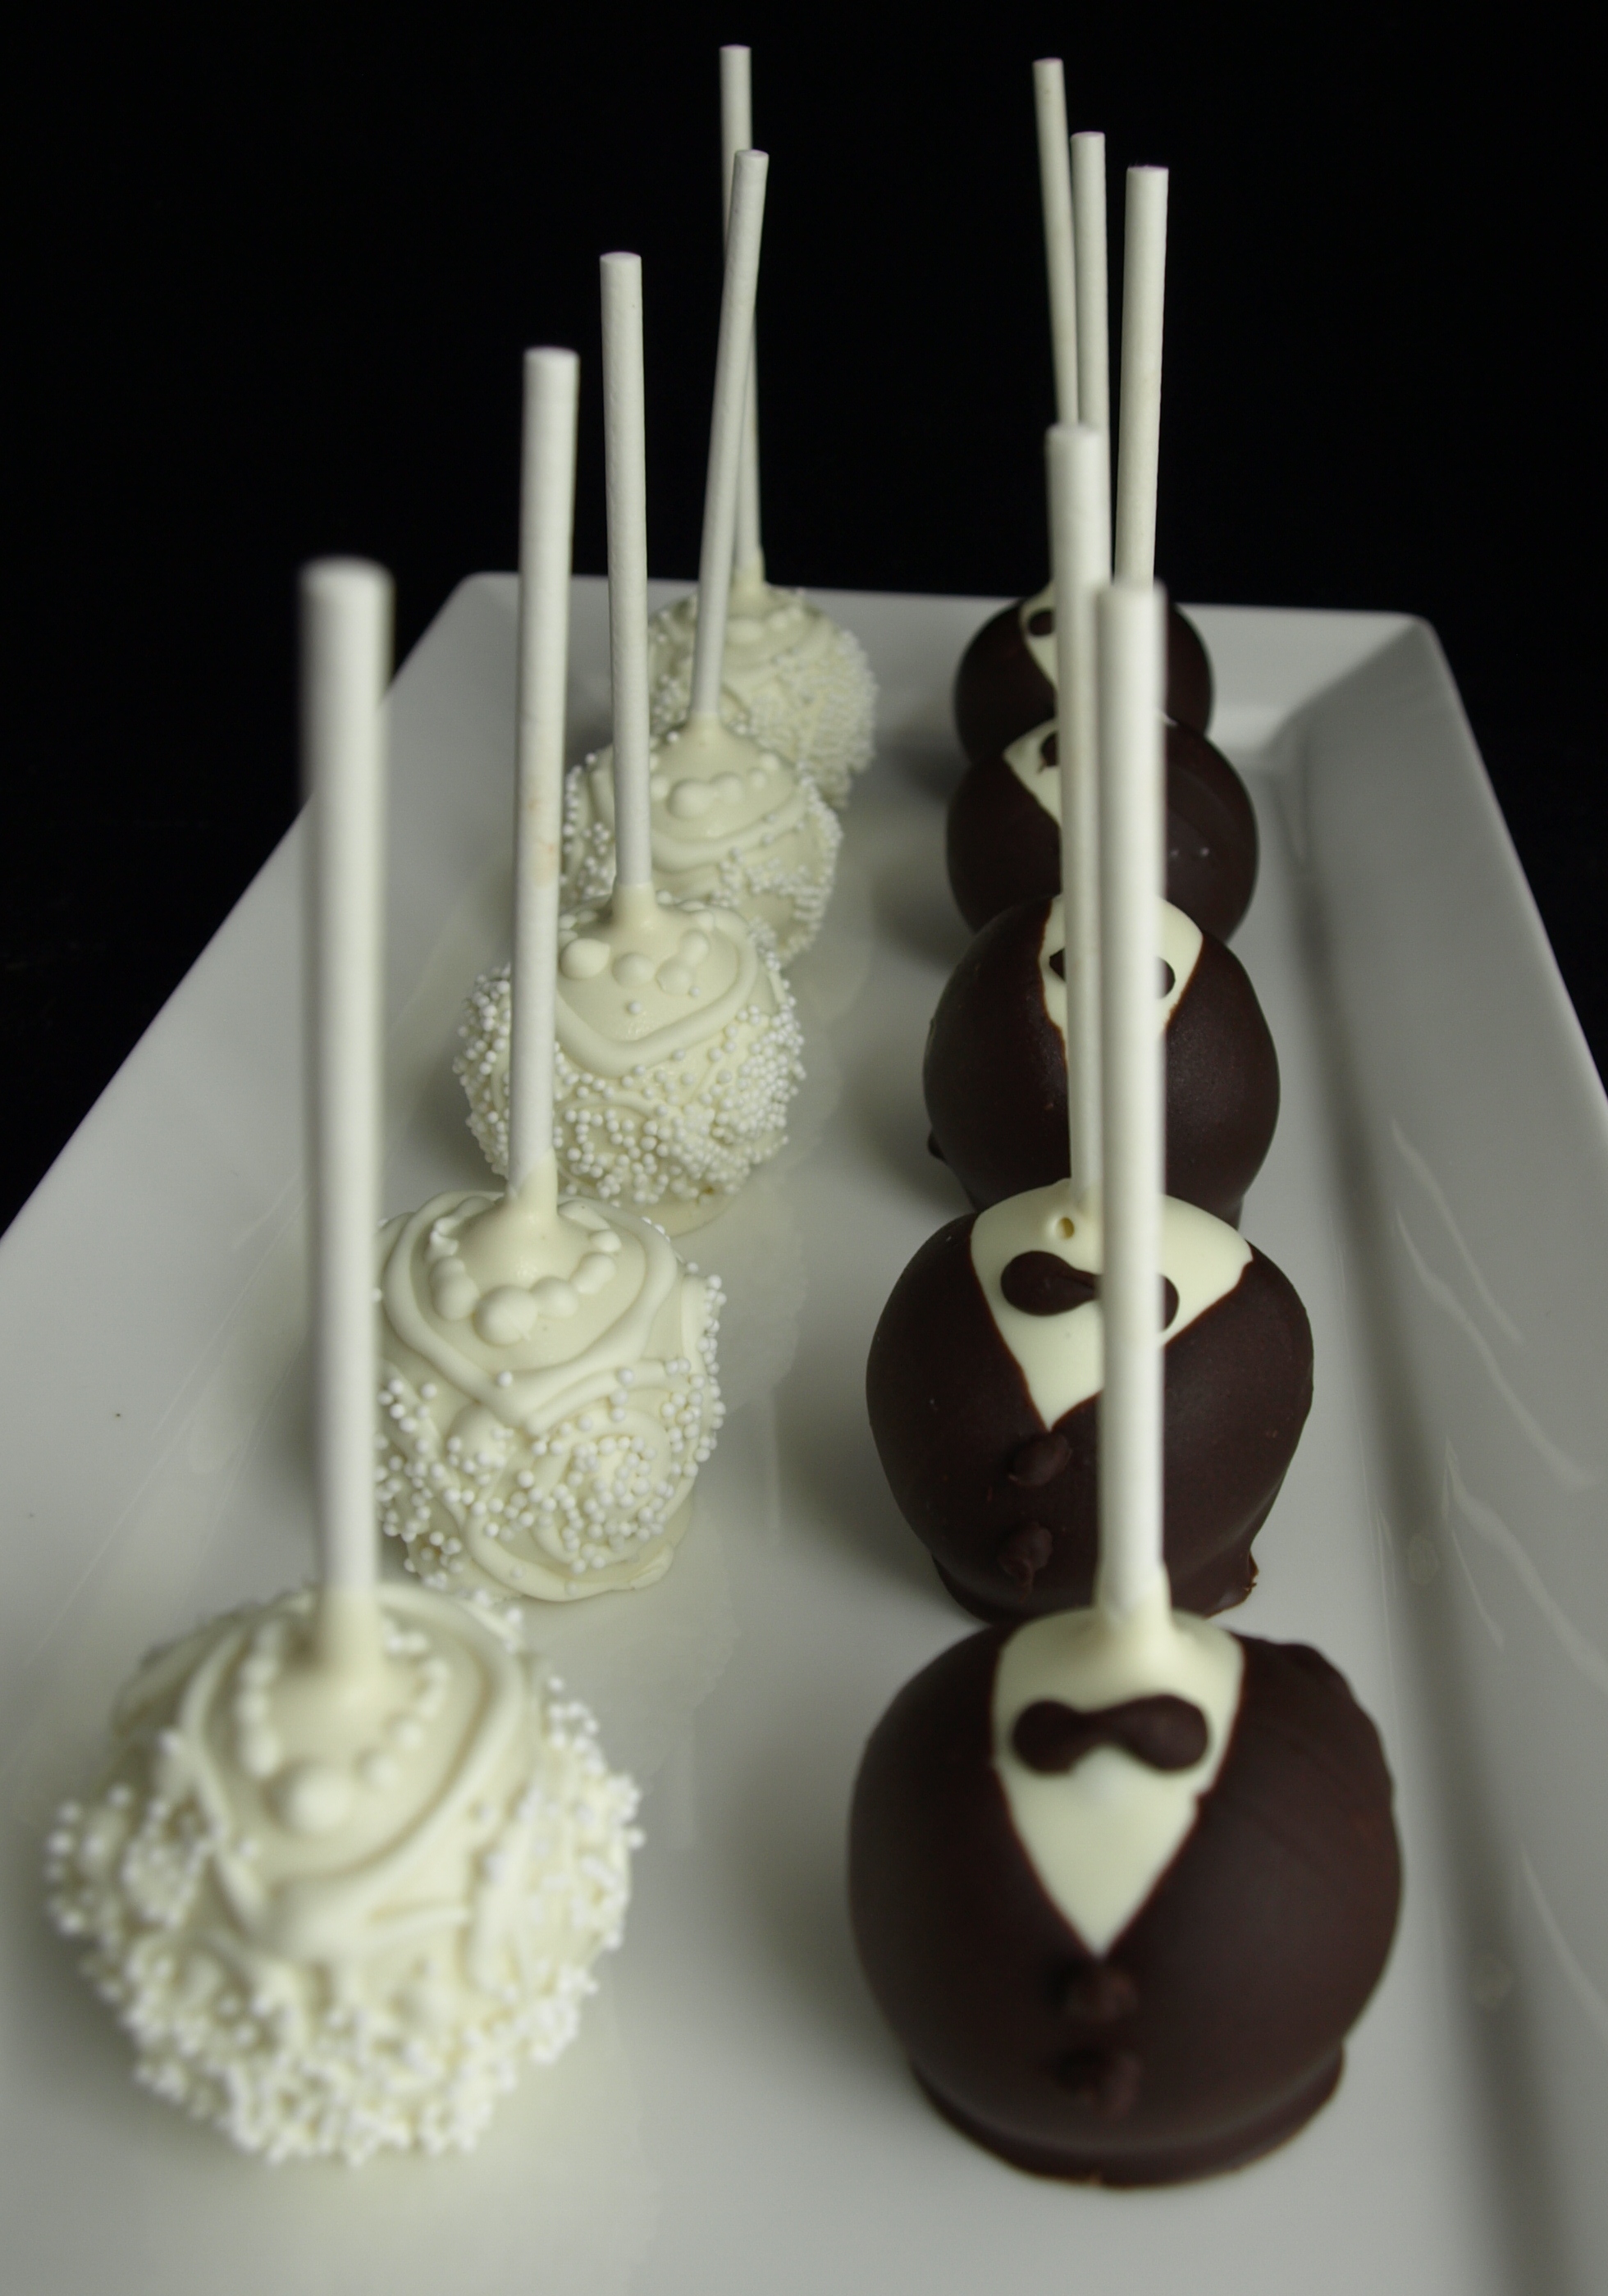 Gourmet Cake Pops - Photos All Recommendation